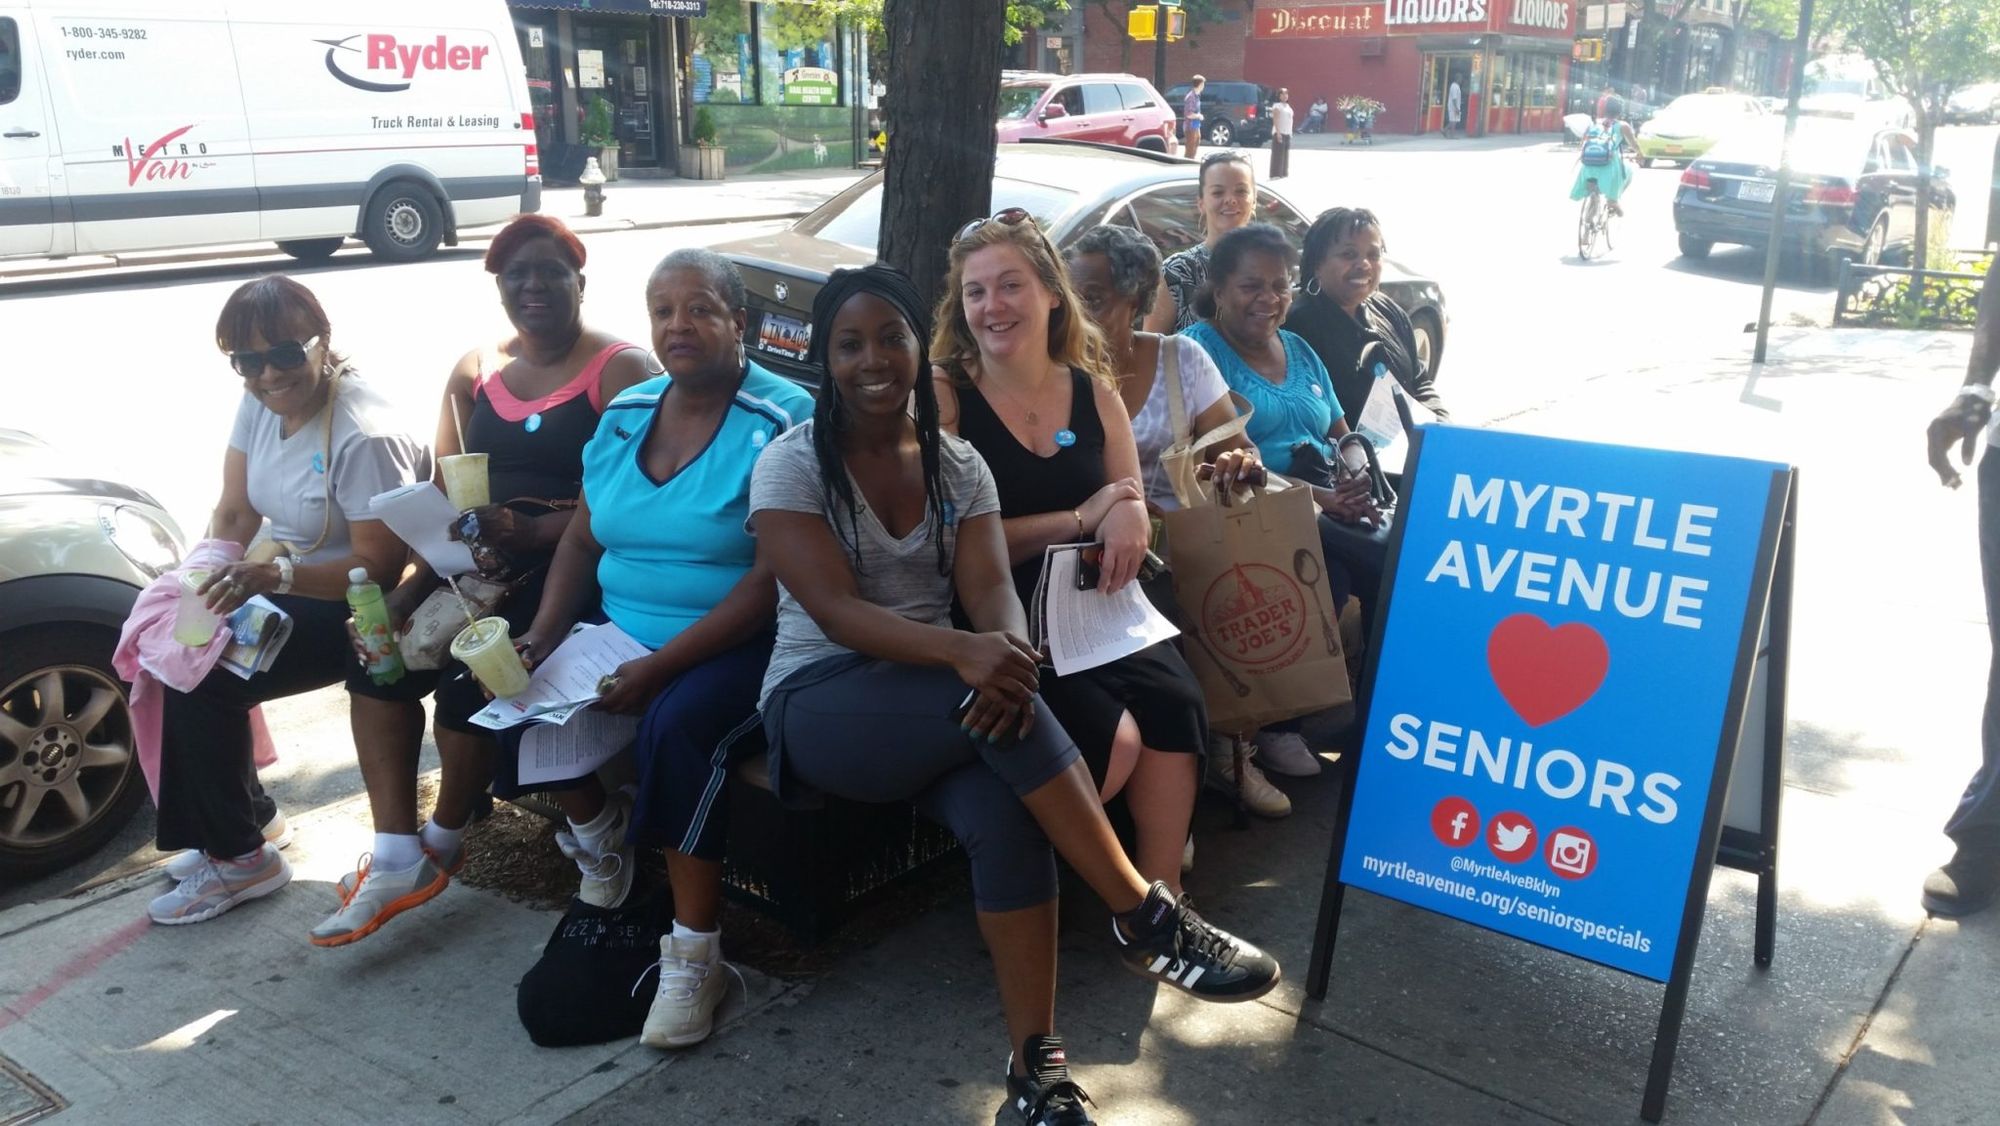 Donate To Support Myrtle Avenue Programming Going Into The New Year